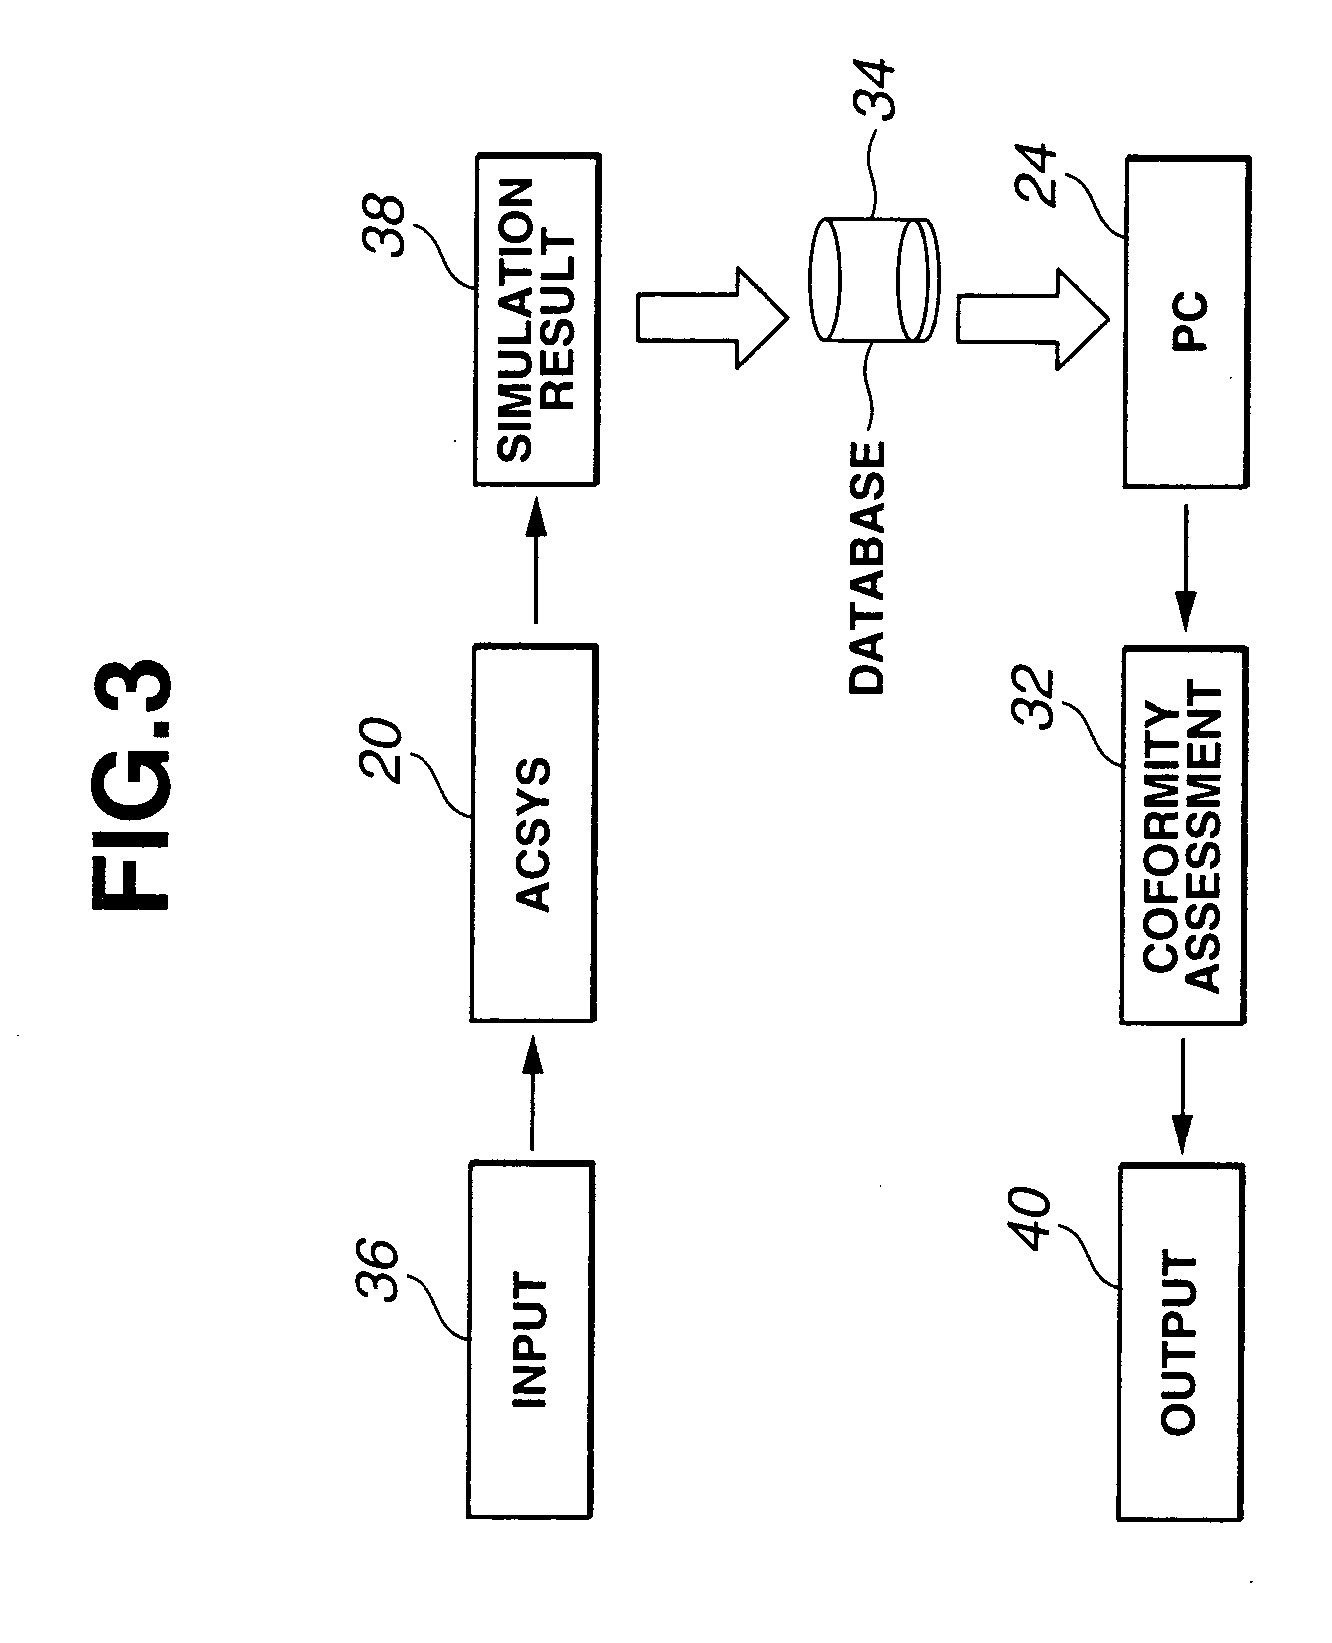 Engineering assist method and system